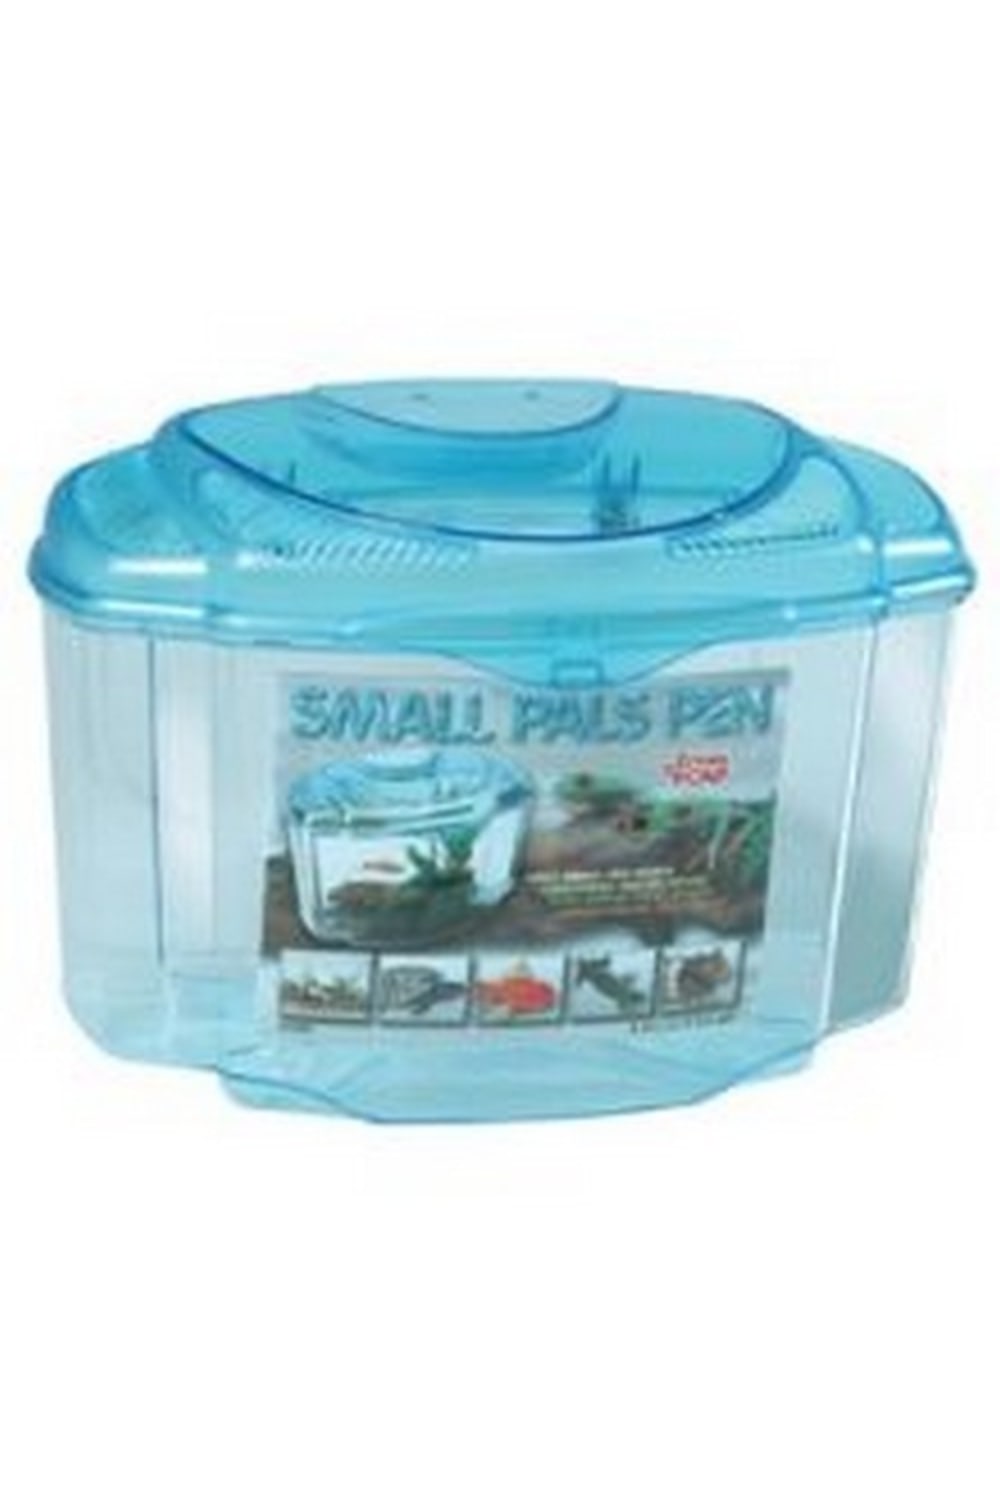 Pals Pen Small Animals Temporary Housing (May Vary) (One Size)